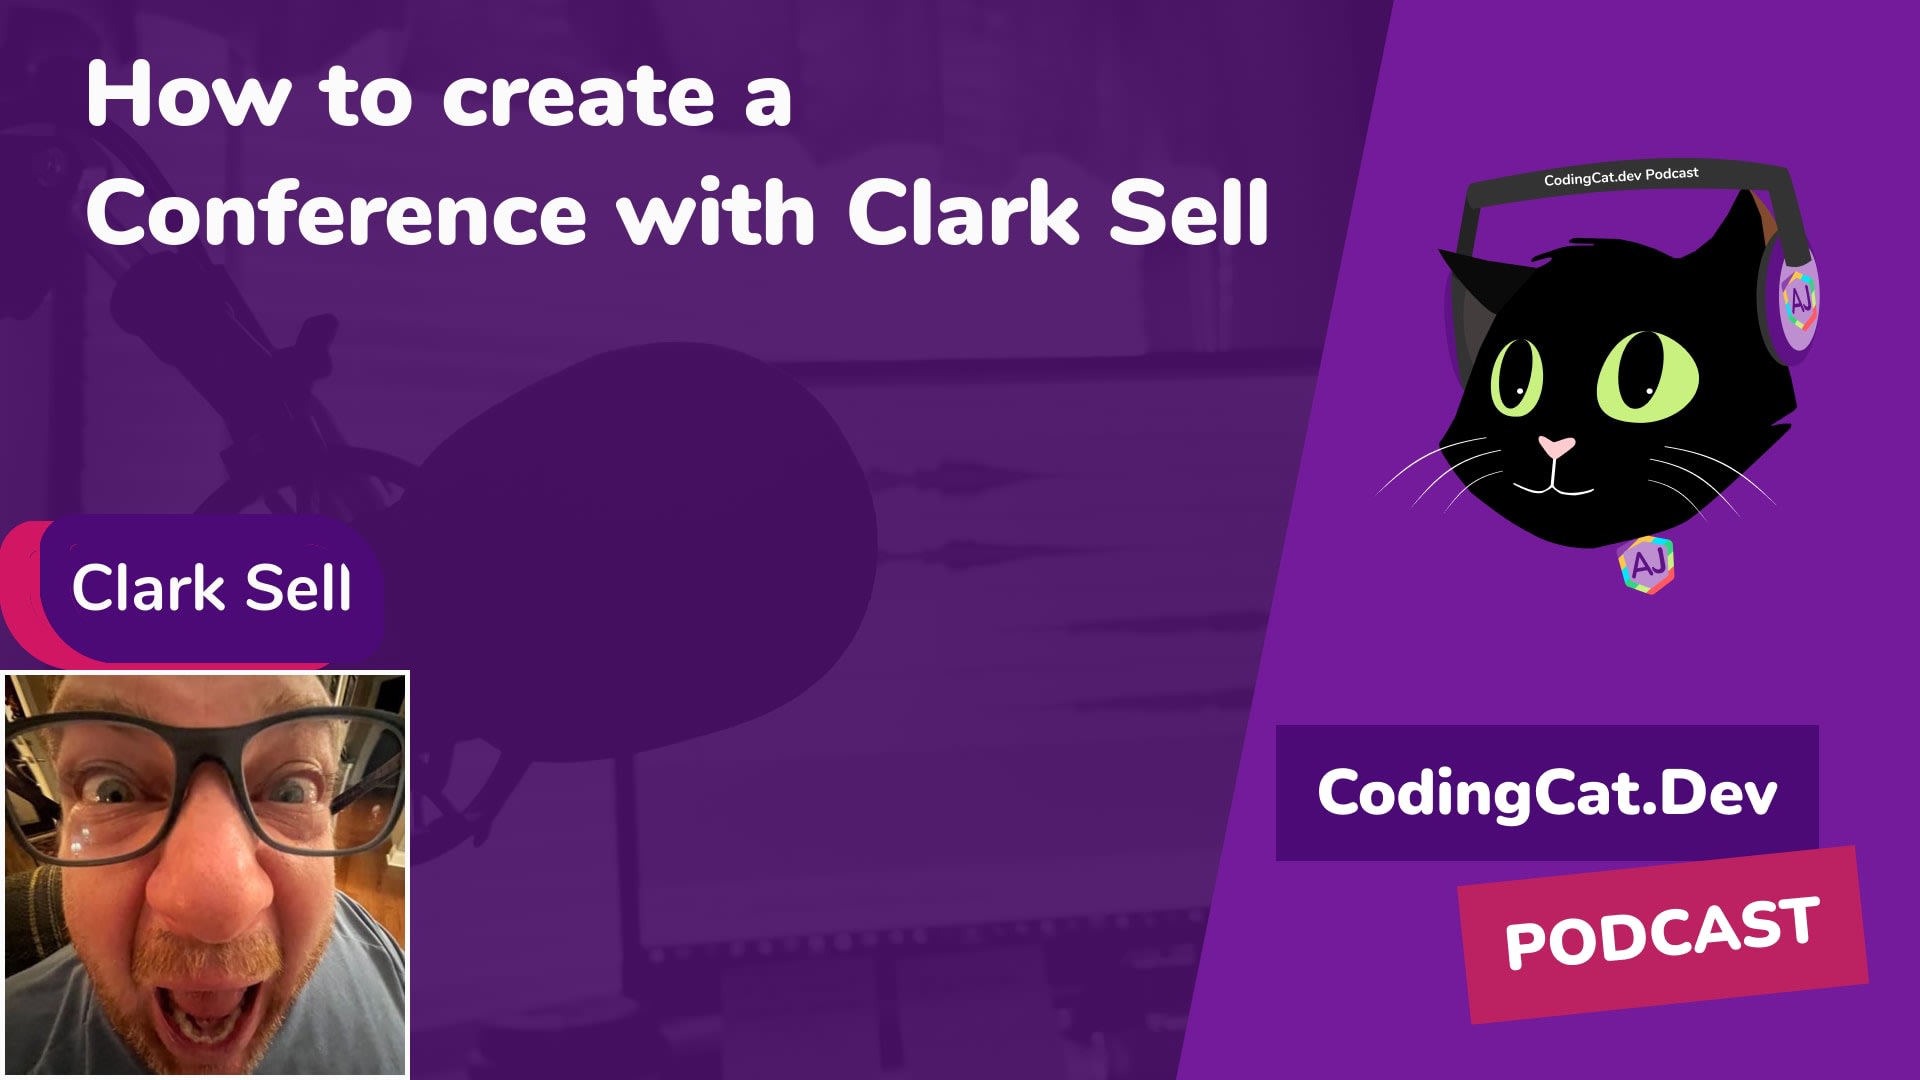 3.2 - How to create a Conference with Clark Sell